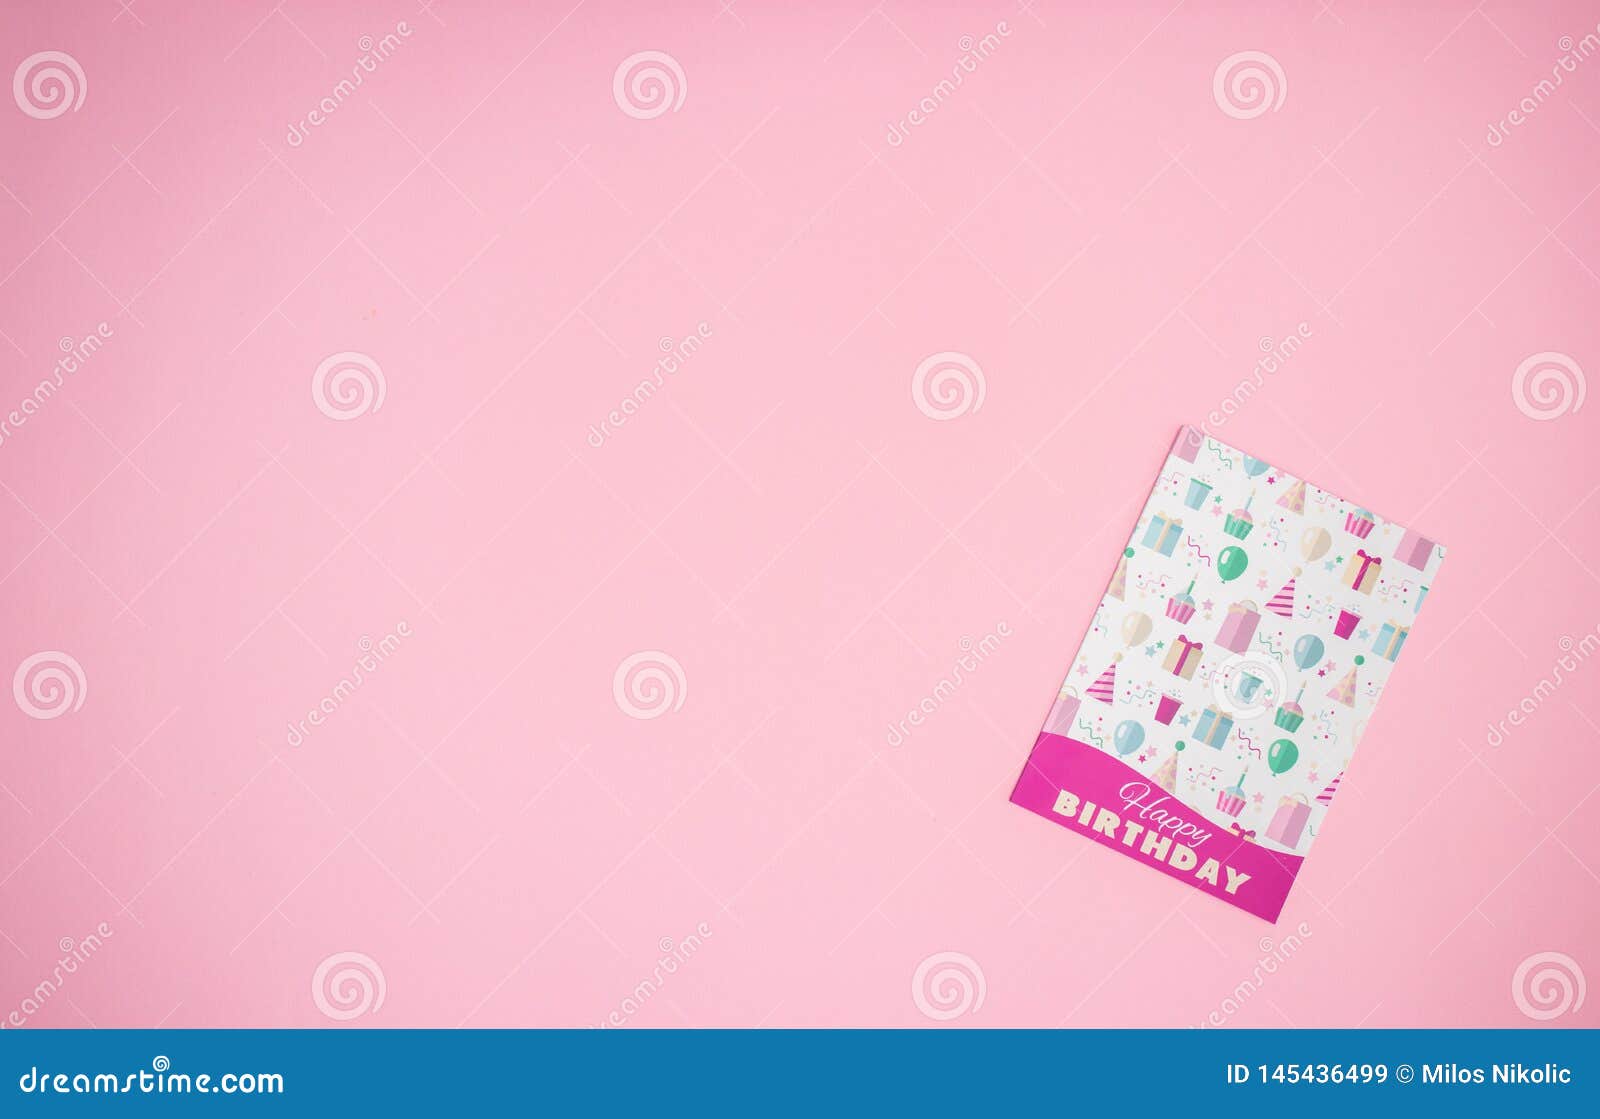 Birthday Card On Pink Background Stock Image - Image of white, wishes ...